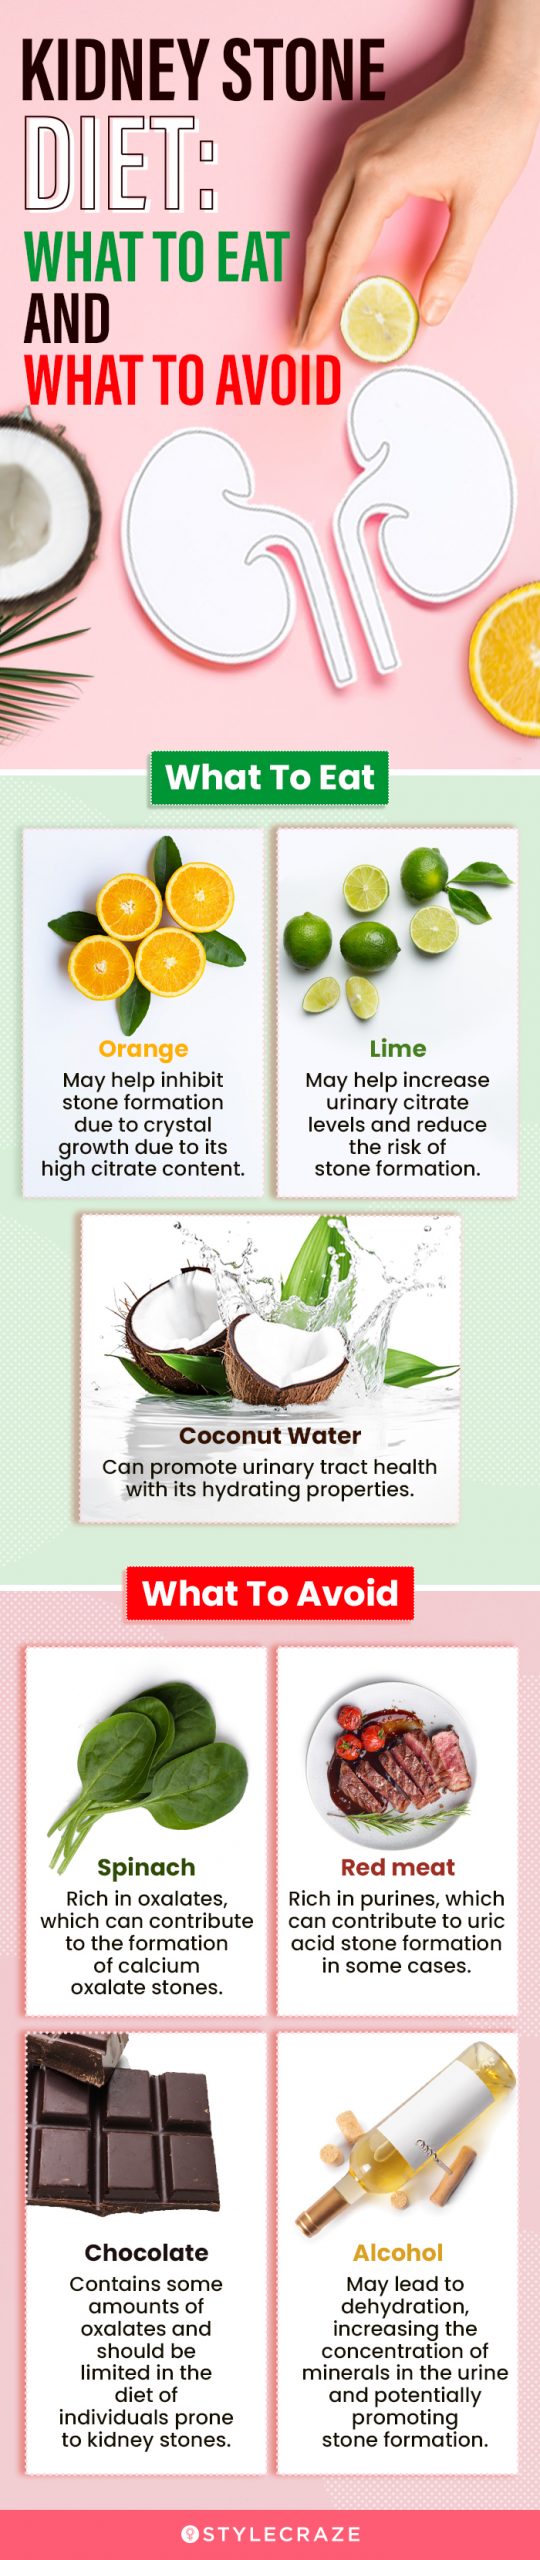 kidney stone diet what to eat and what to avoid (infographic)